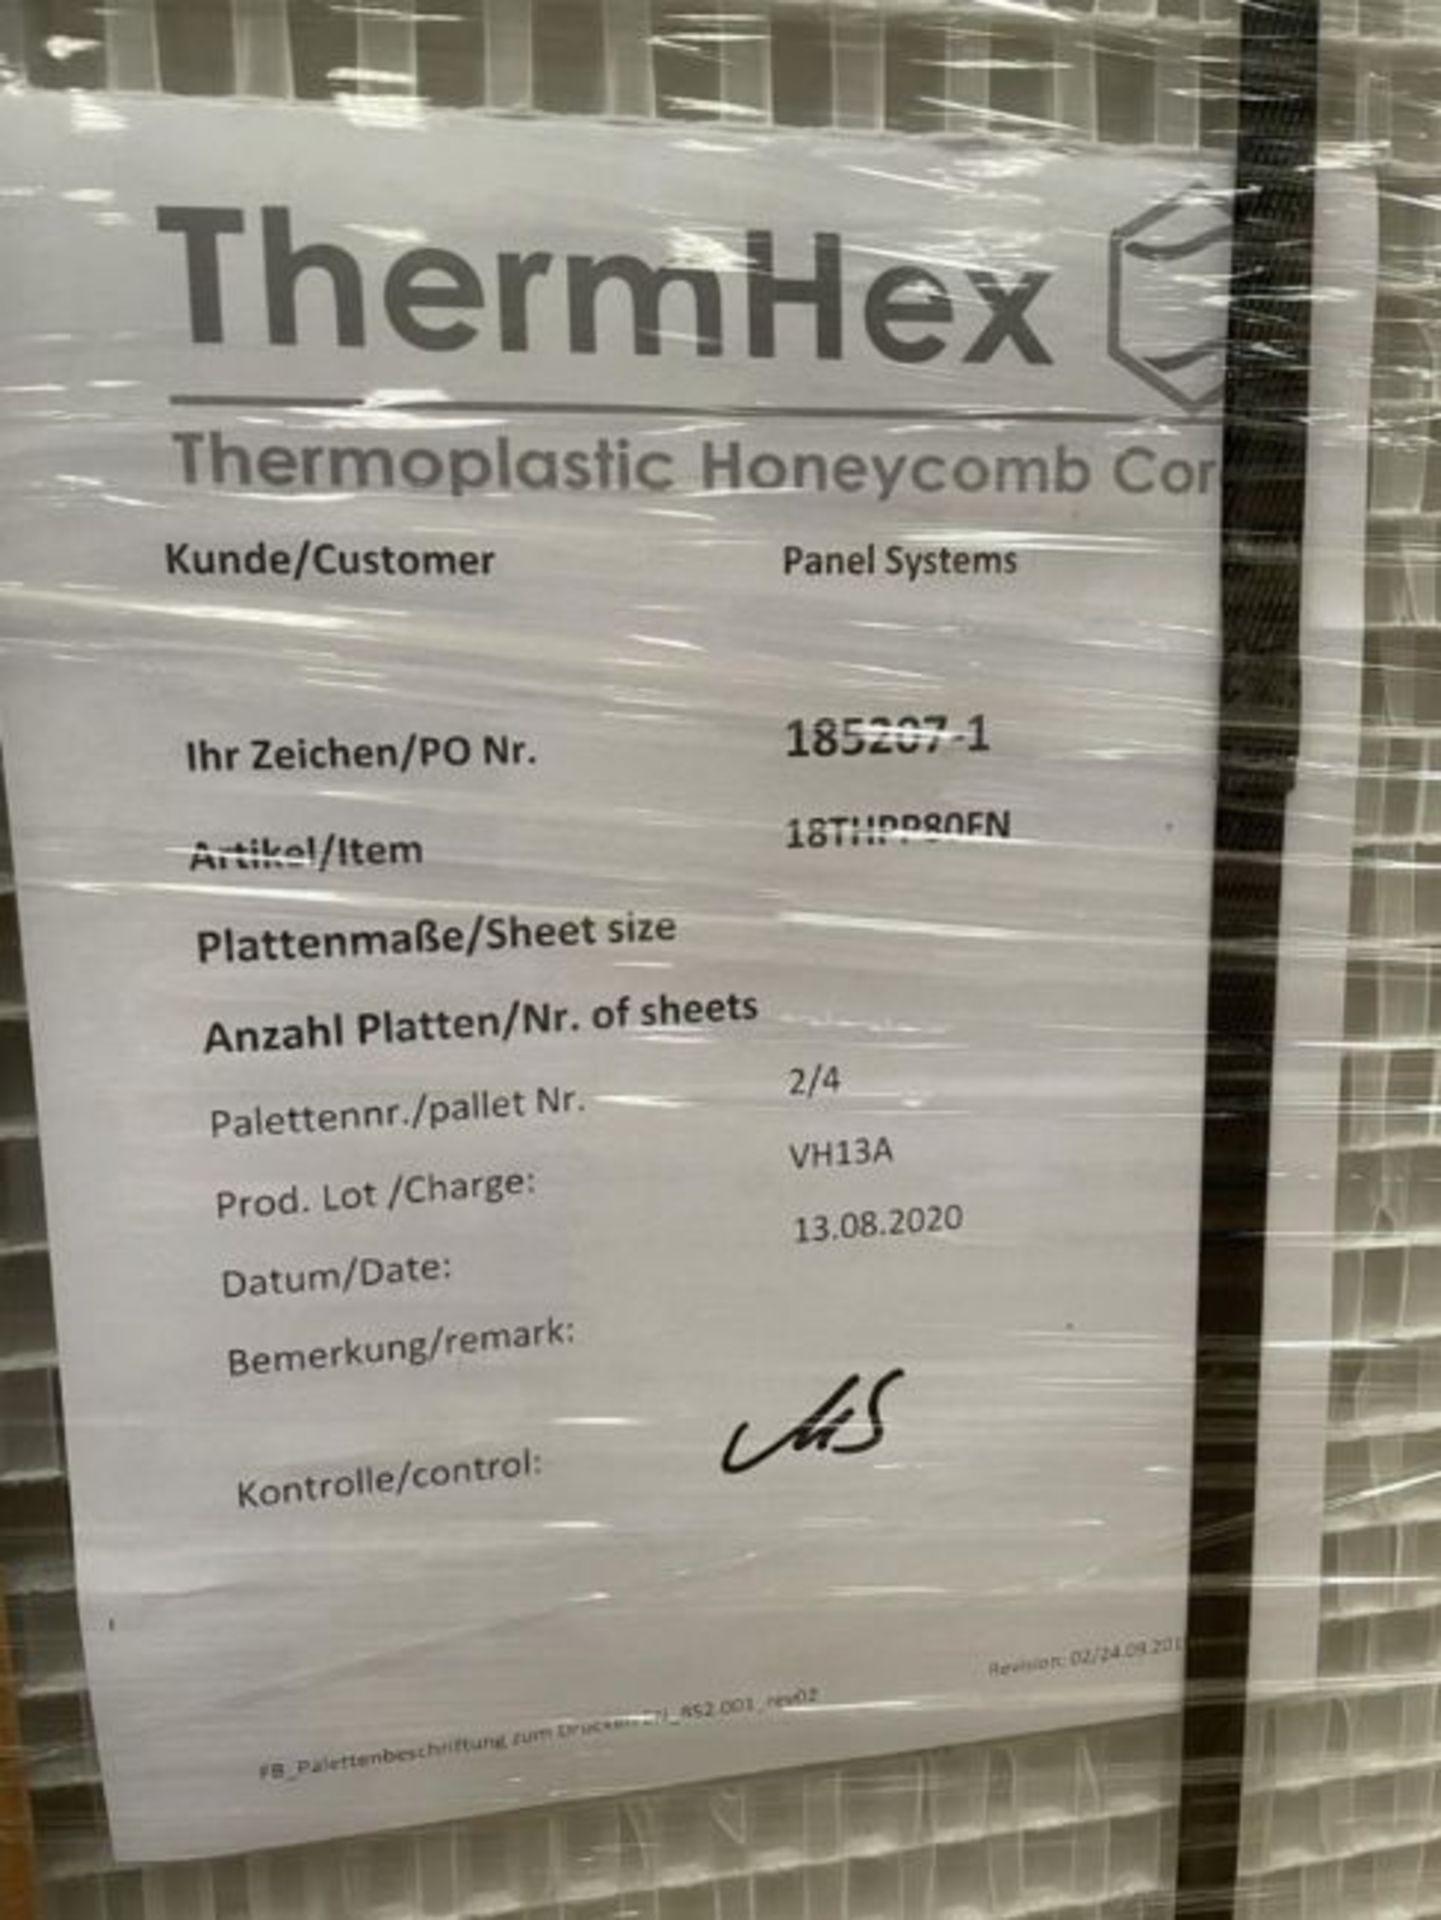 100 x ThermHex Thermoplastic Honeycomb Core Panels - Size: 693 x 1210 x 20mm - New Stock - - Image 3 of 7